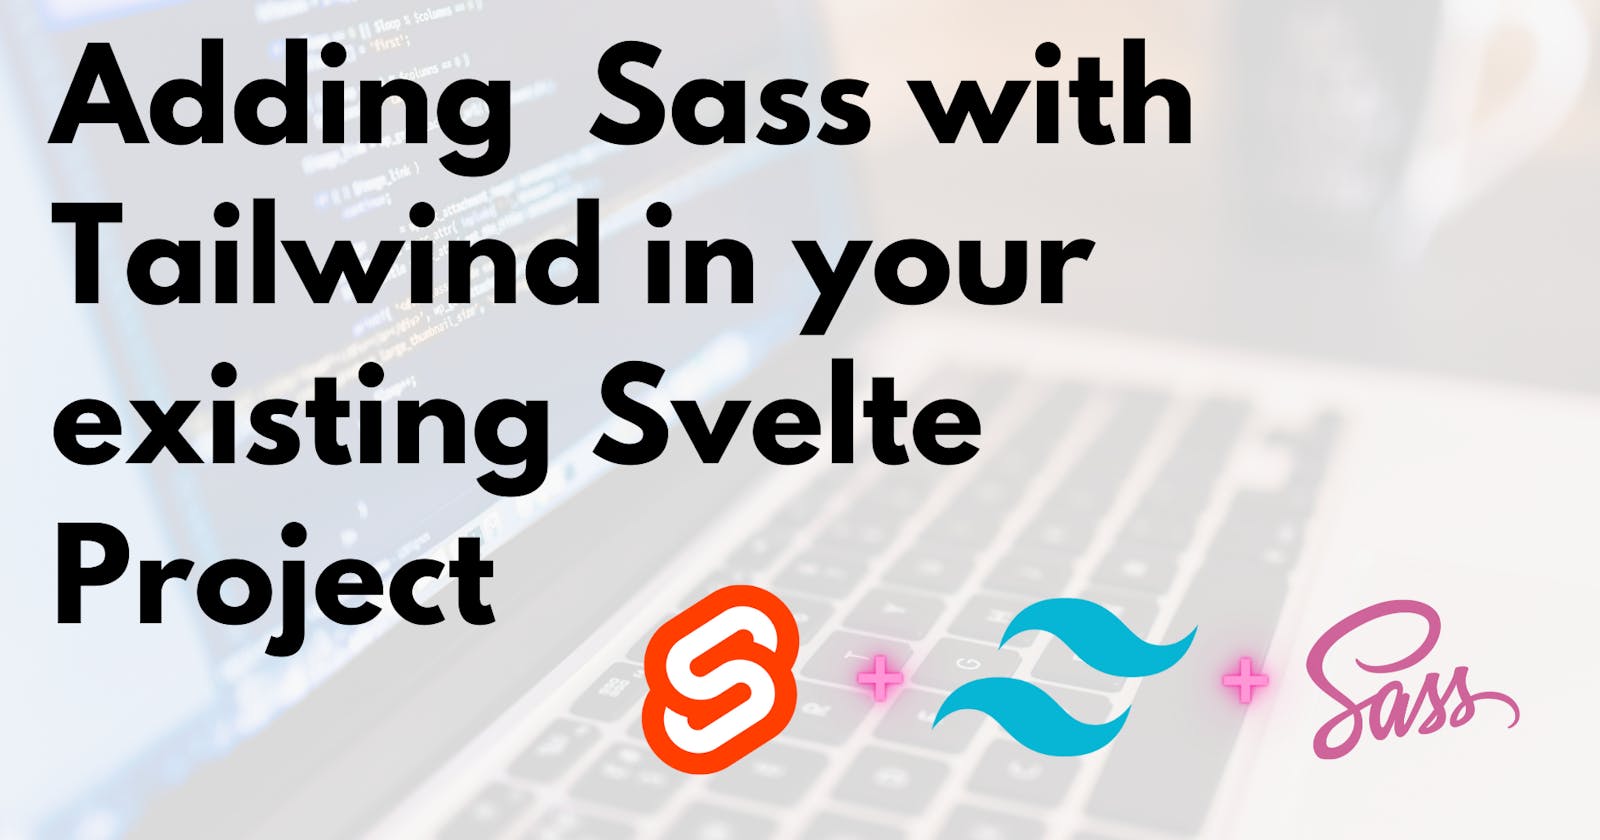 Adding Sass with Tailwind in an existing Svelte Project